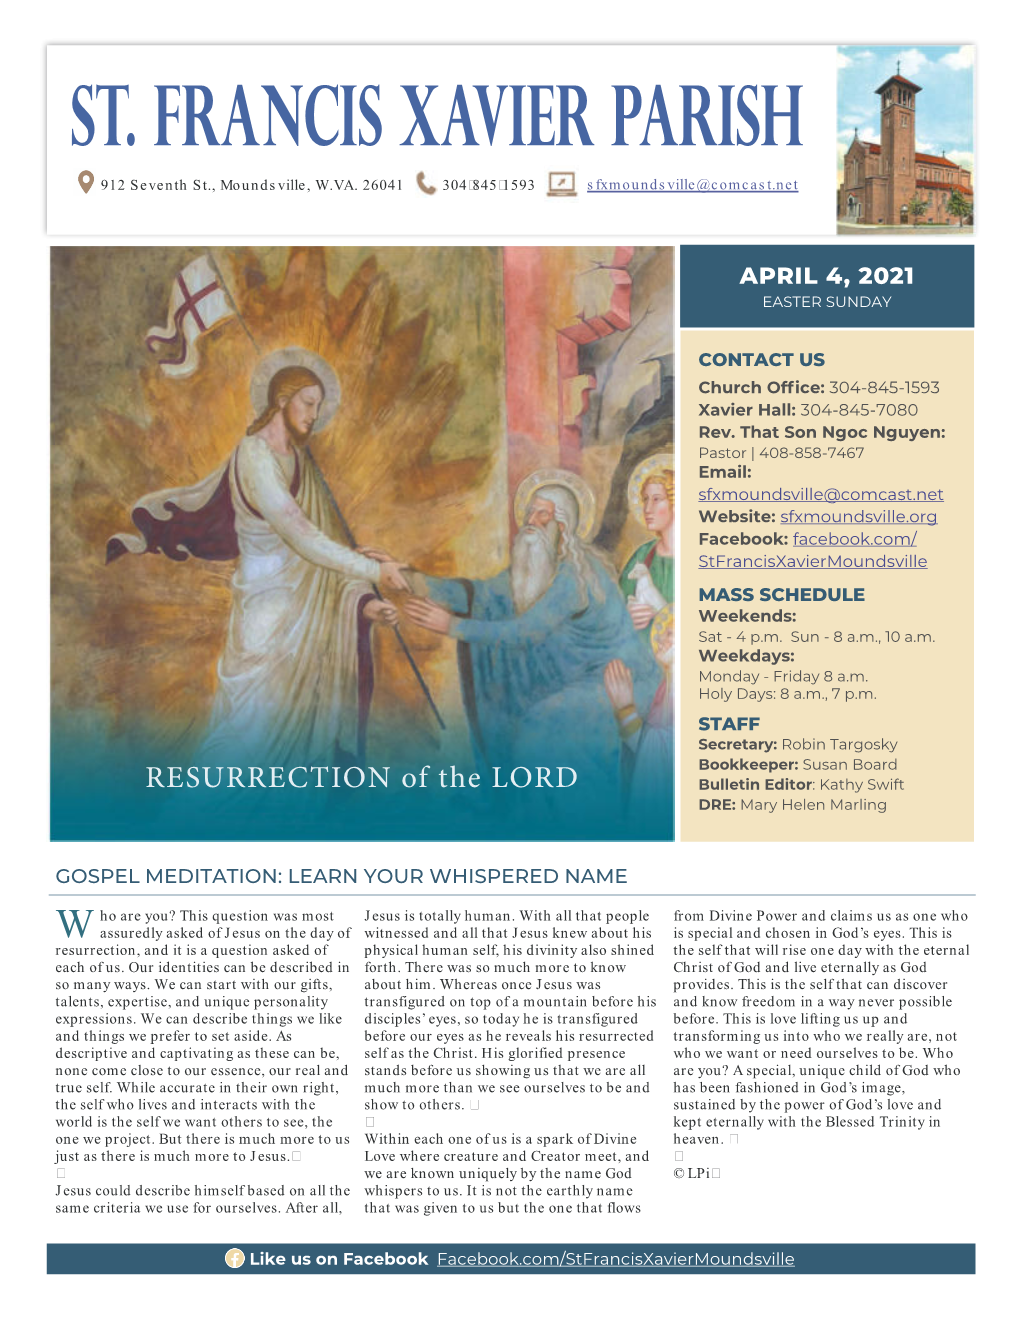 RESURRECTION of the LORD Bulletin Editor: Kathy Swift DRE: Mary Helen Marling